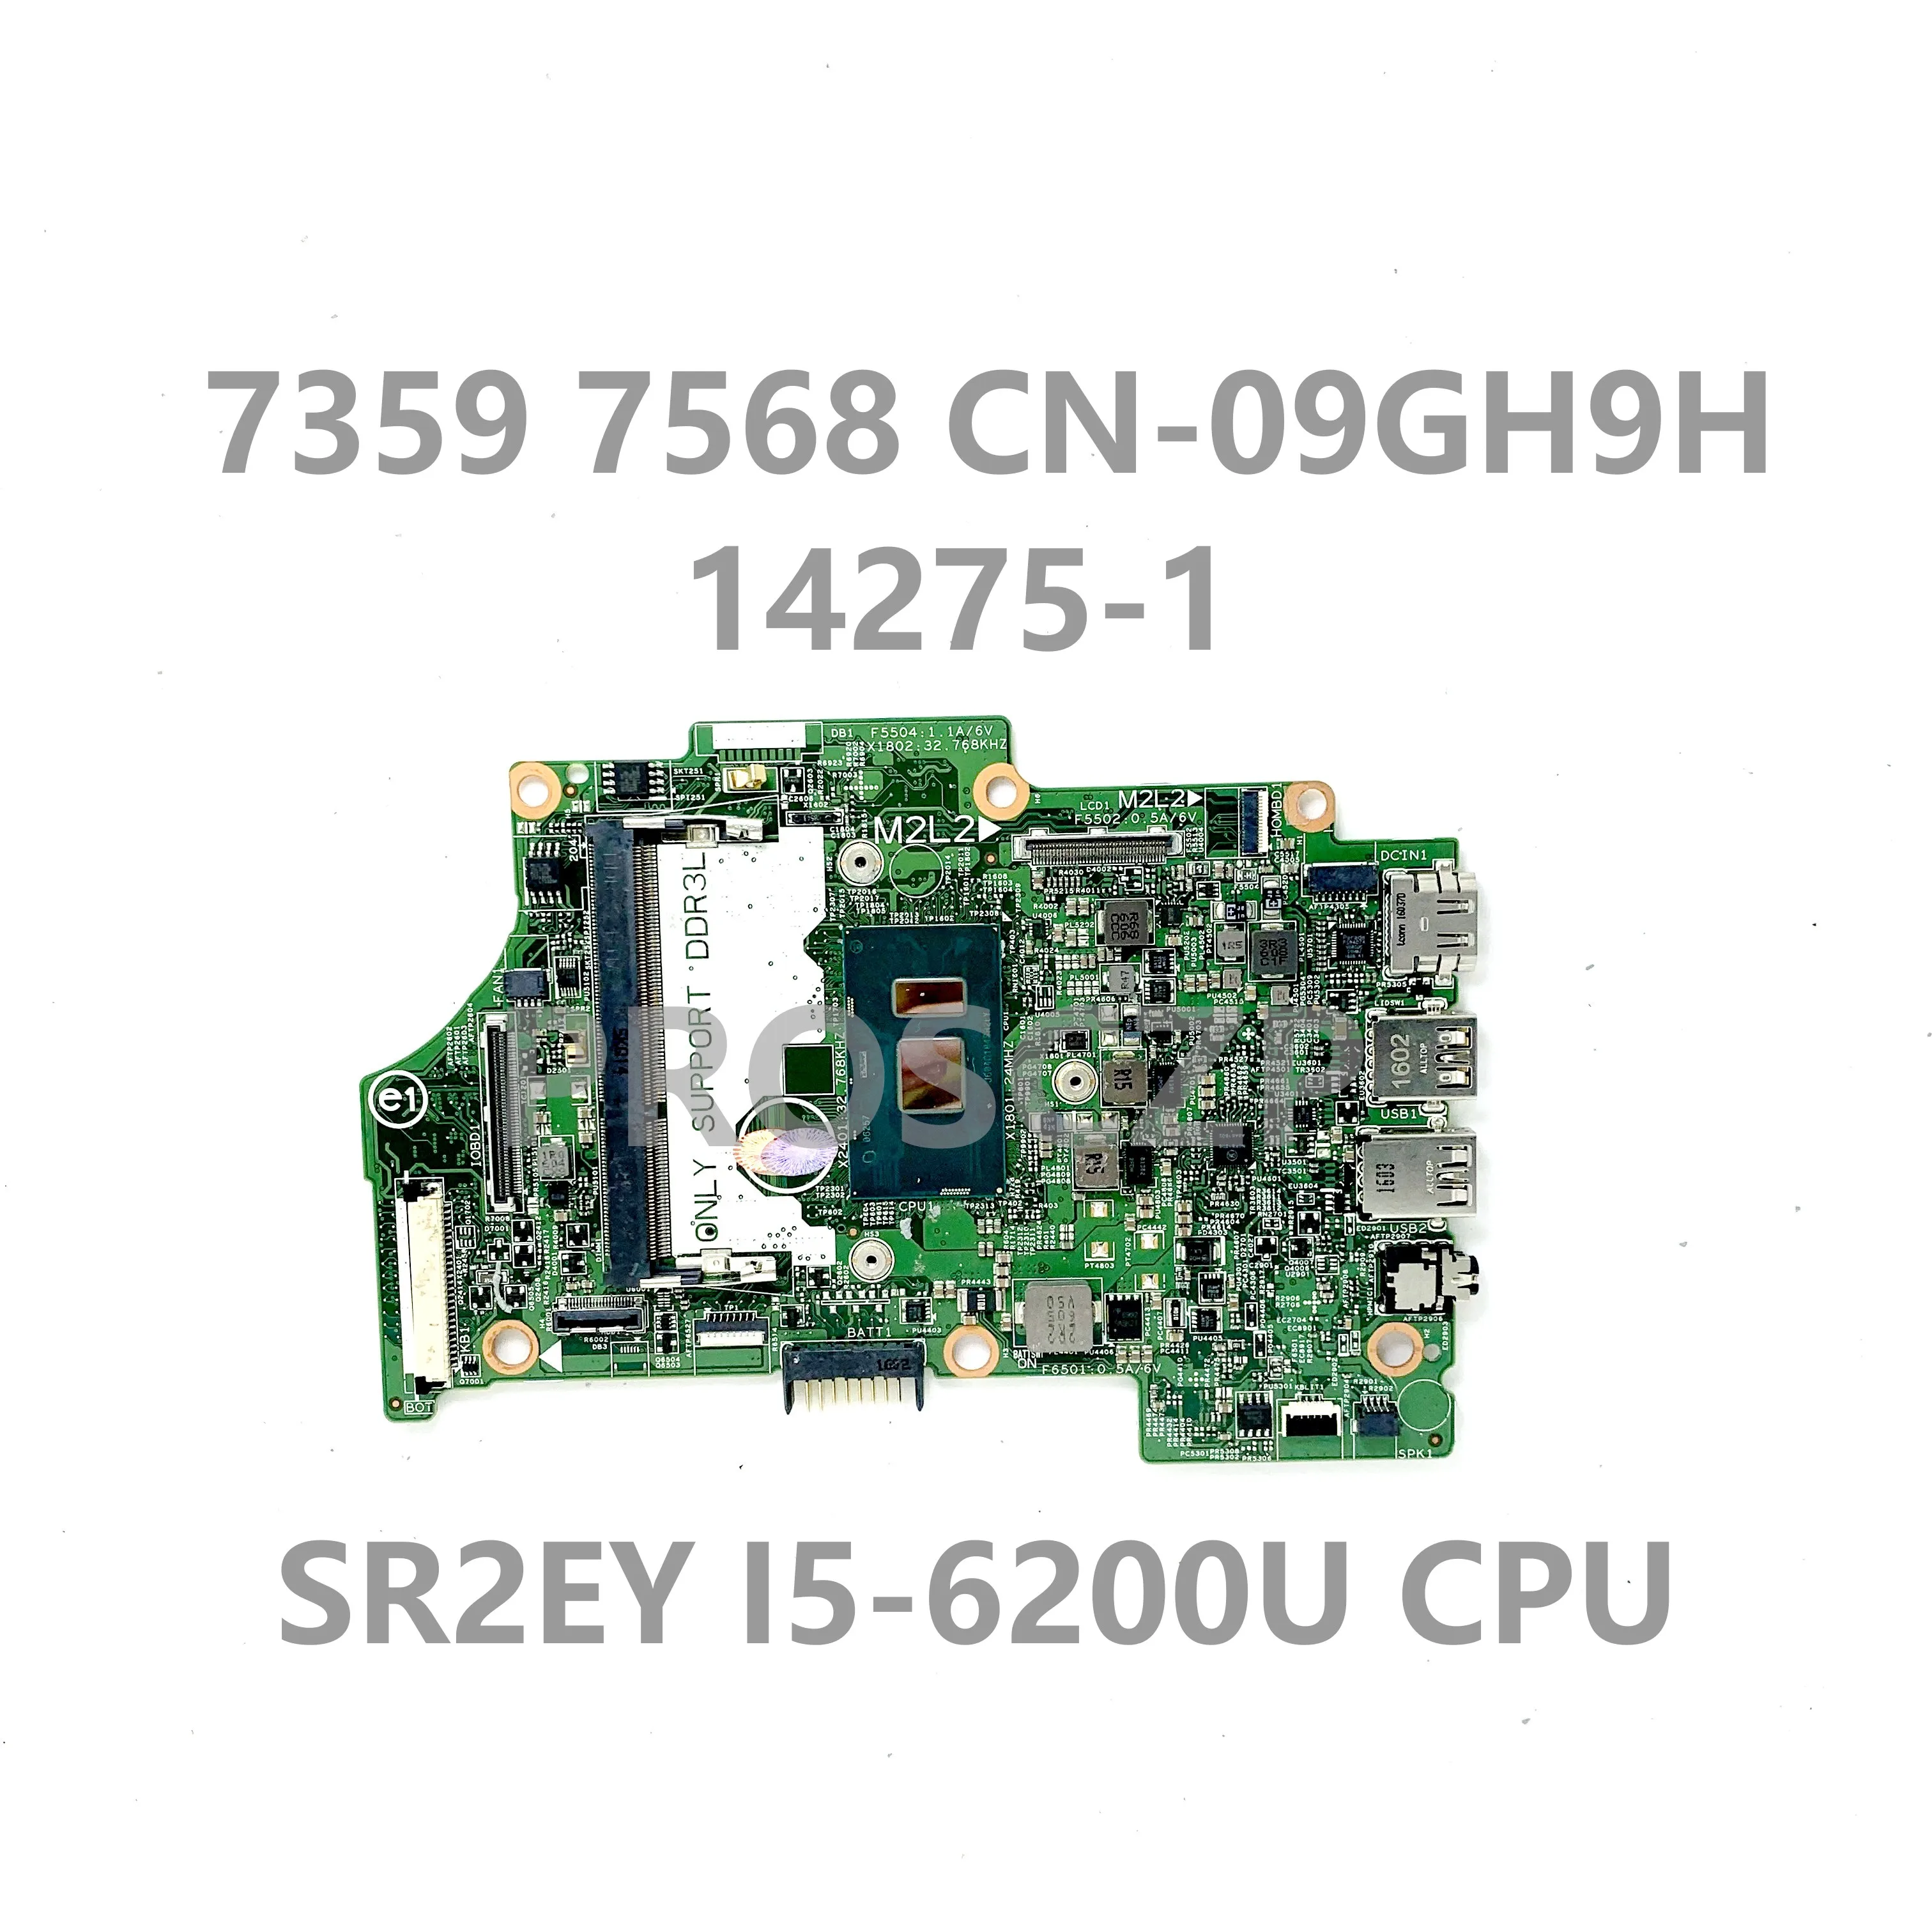 

CN-09GH9H 09GH9H 9GH9H With SR2EY I5-6200U CPU Mainboard For DELL 7359 7568 Laptop Motherboard 14275-1 100% Full Working Well